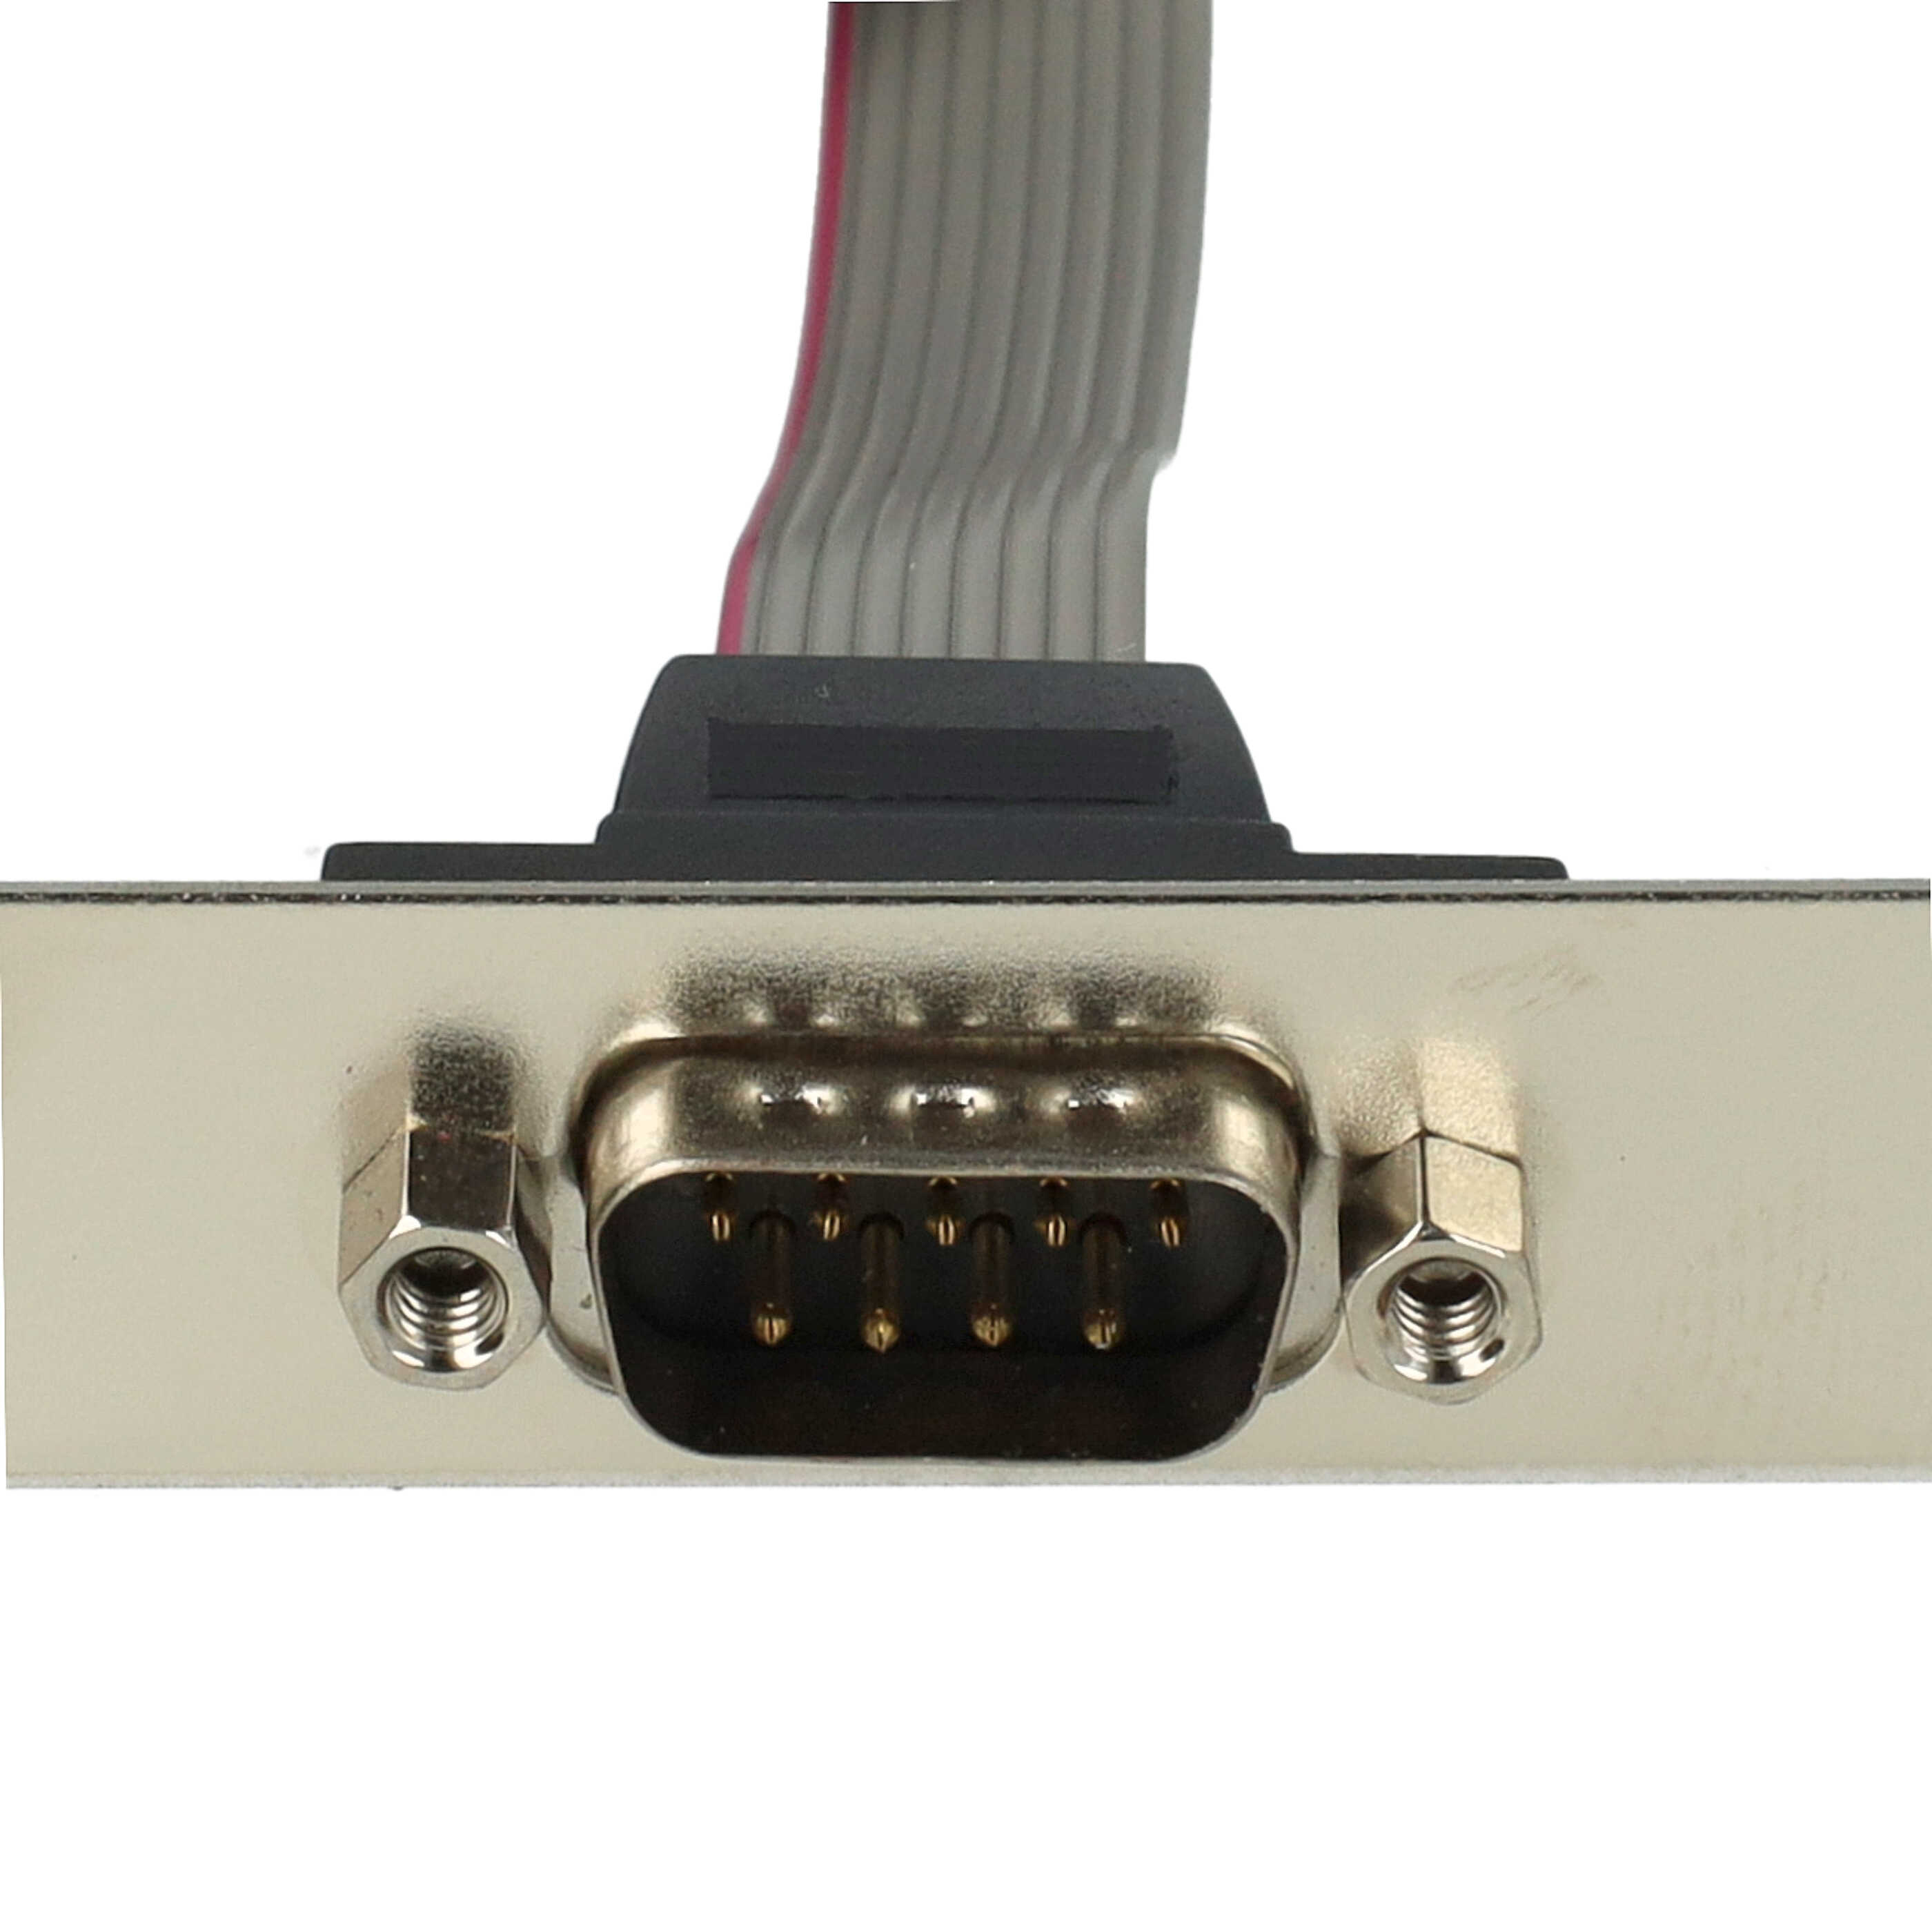 RS232 Slot Bracket suitable forComputer, PC with 10 Pin Motherboard Connector